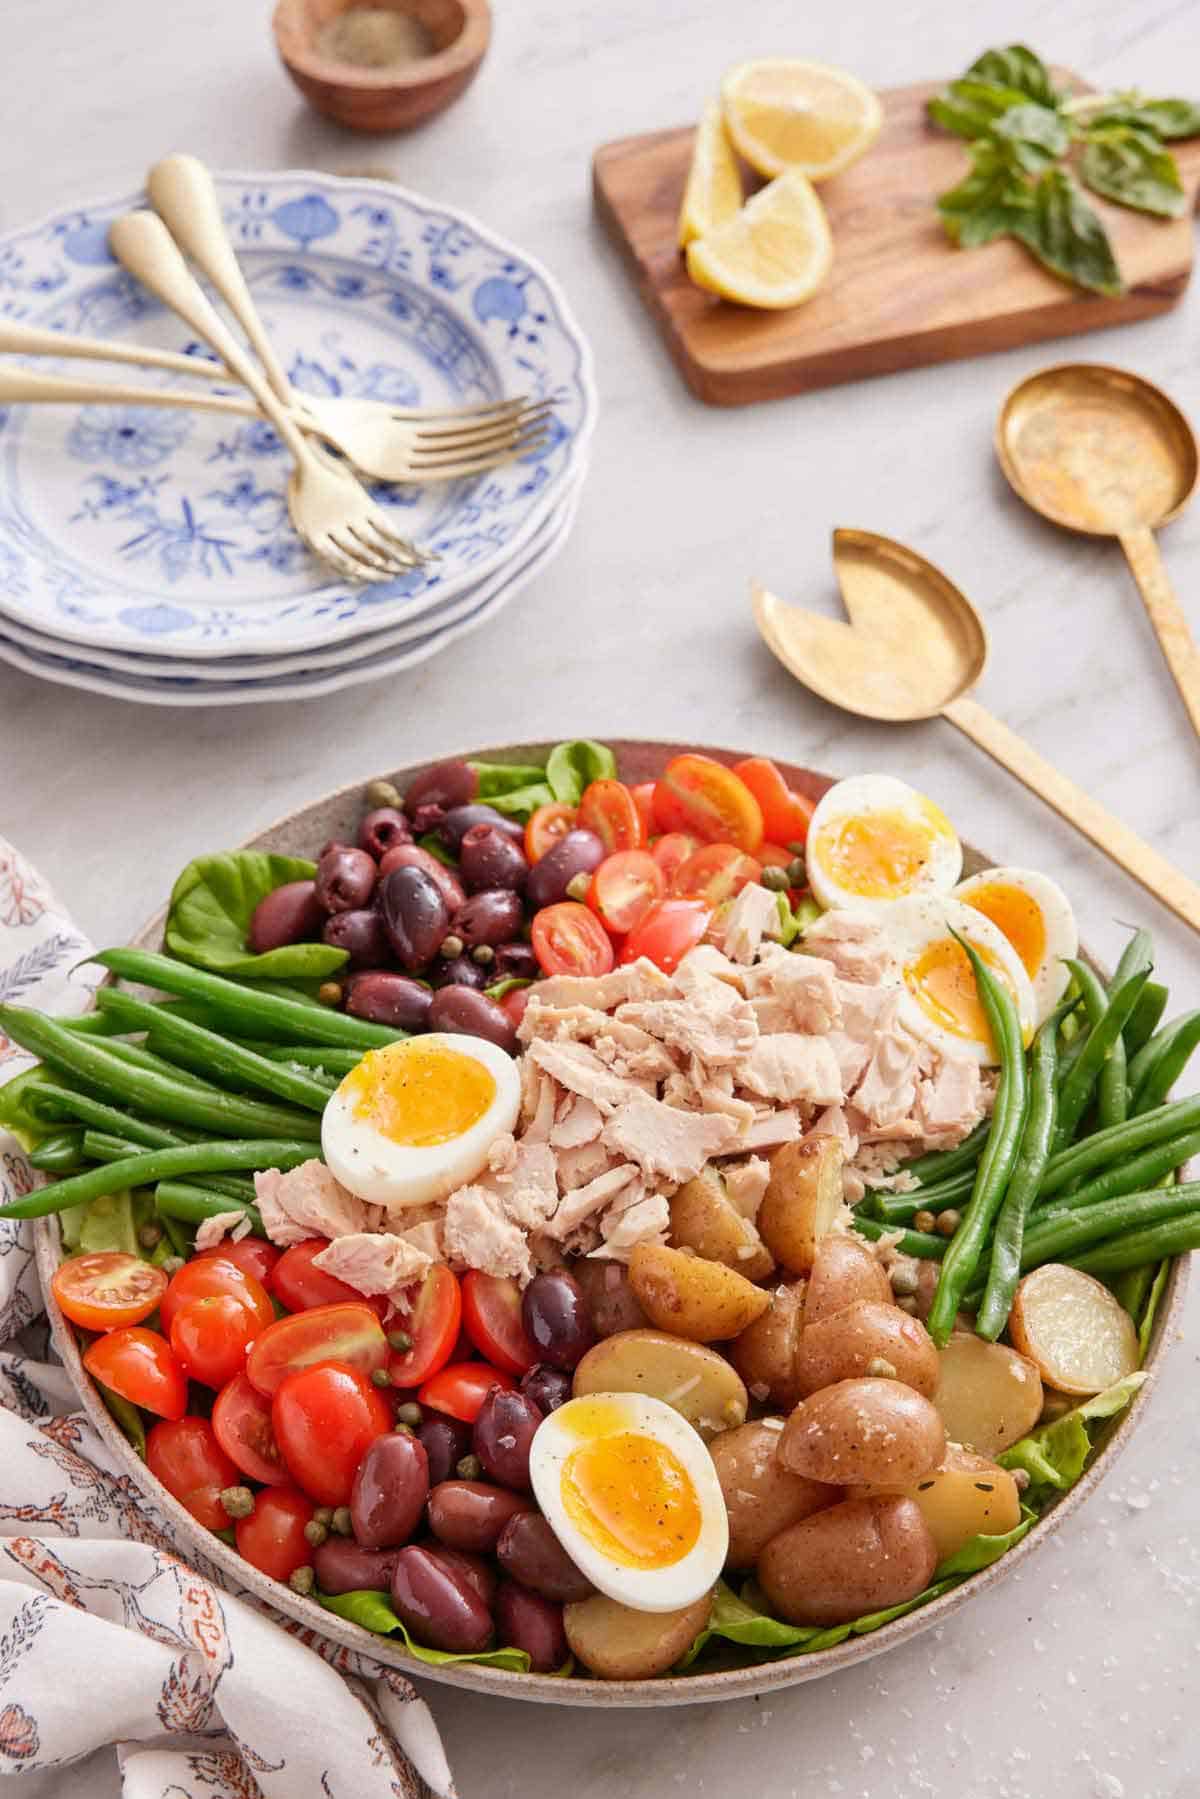 Ingredients for niçoise salad in a platter. Serving spoons, stack of plates, and forks in the background.